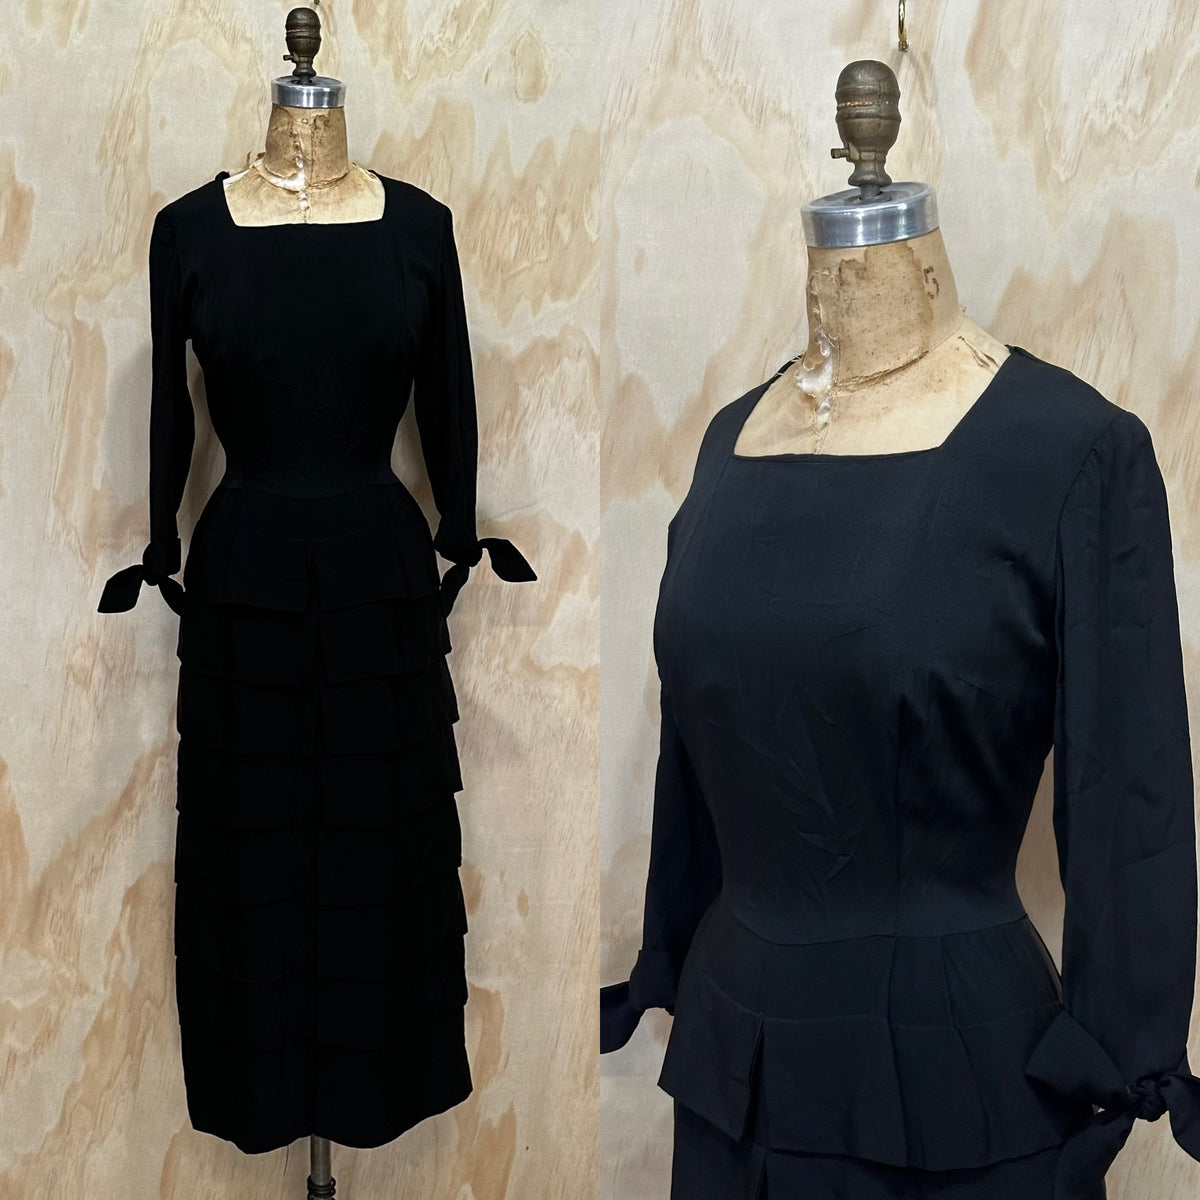 Vintage 50s Black Betty Hartford Dress • Fitted Little Black dress fit and flare